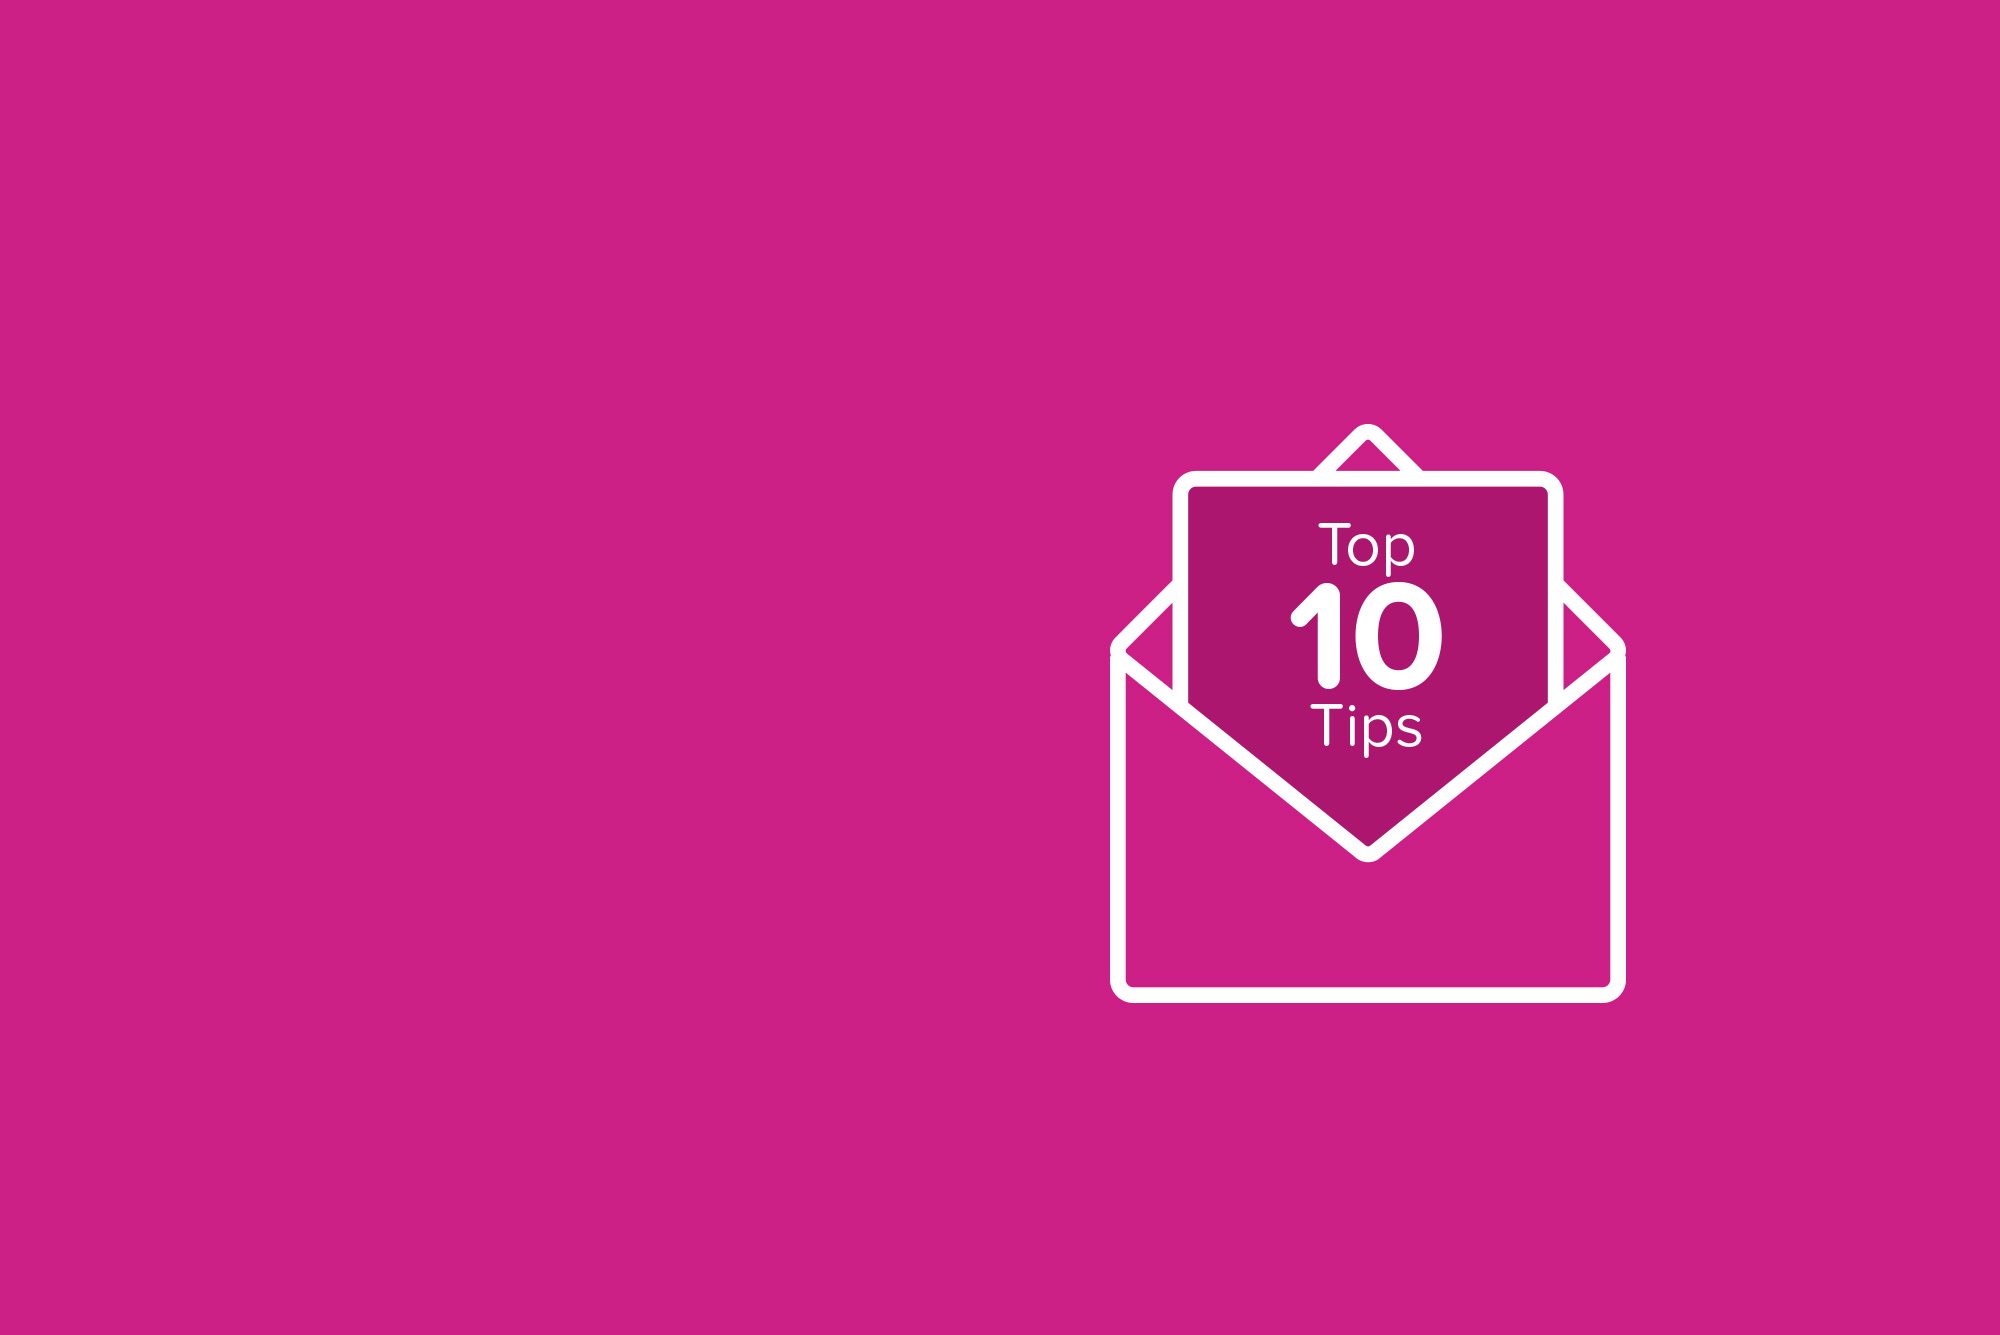 Email icon with top 10 tips text on pink background - Email marketing tips